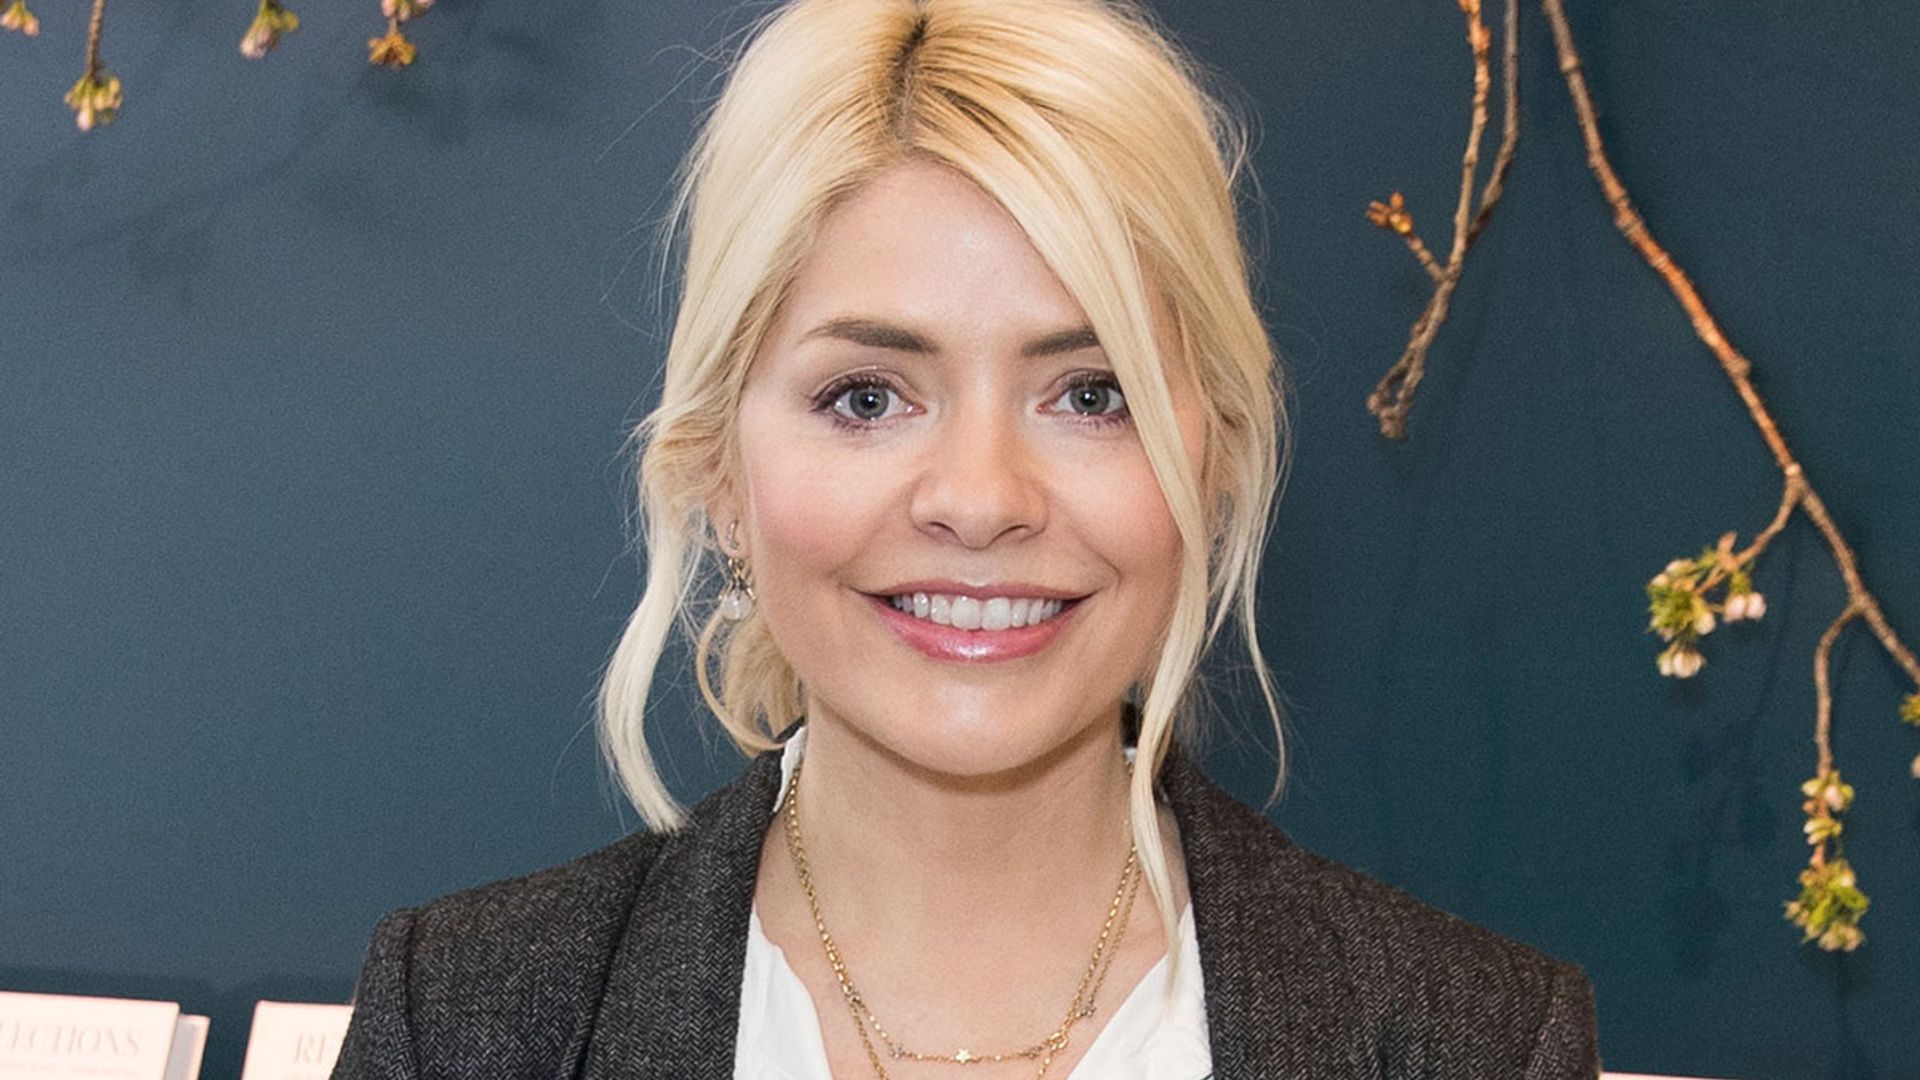 This Morning's Holly Willoughby sparks reaction with stunning new photo of lookalike mum